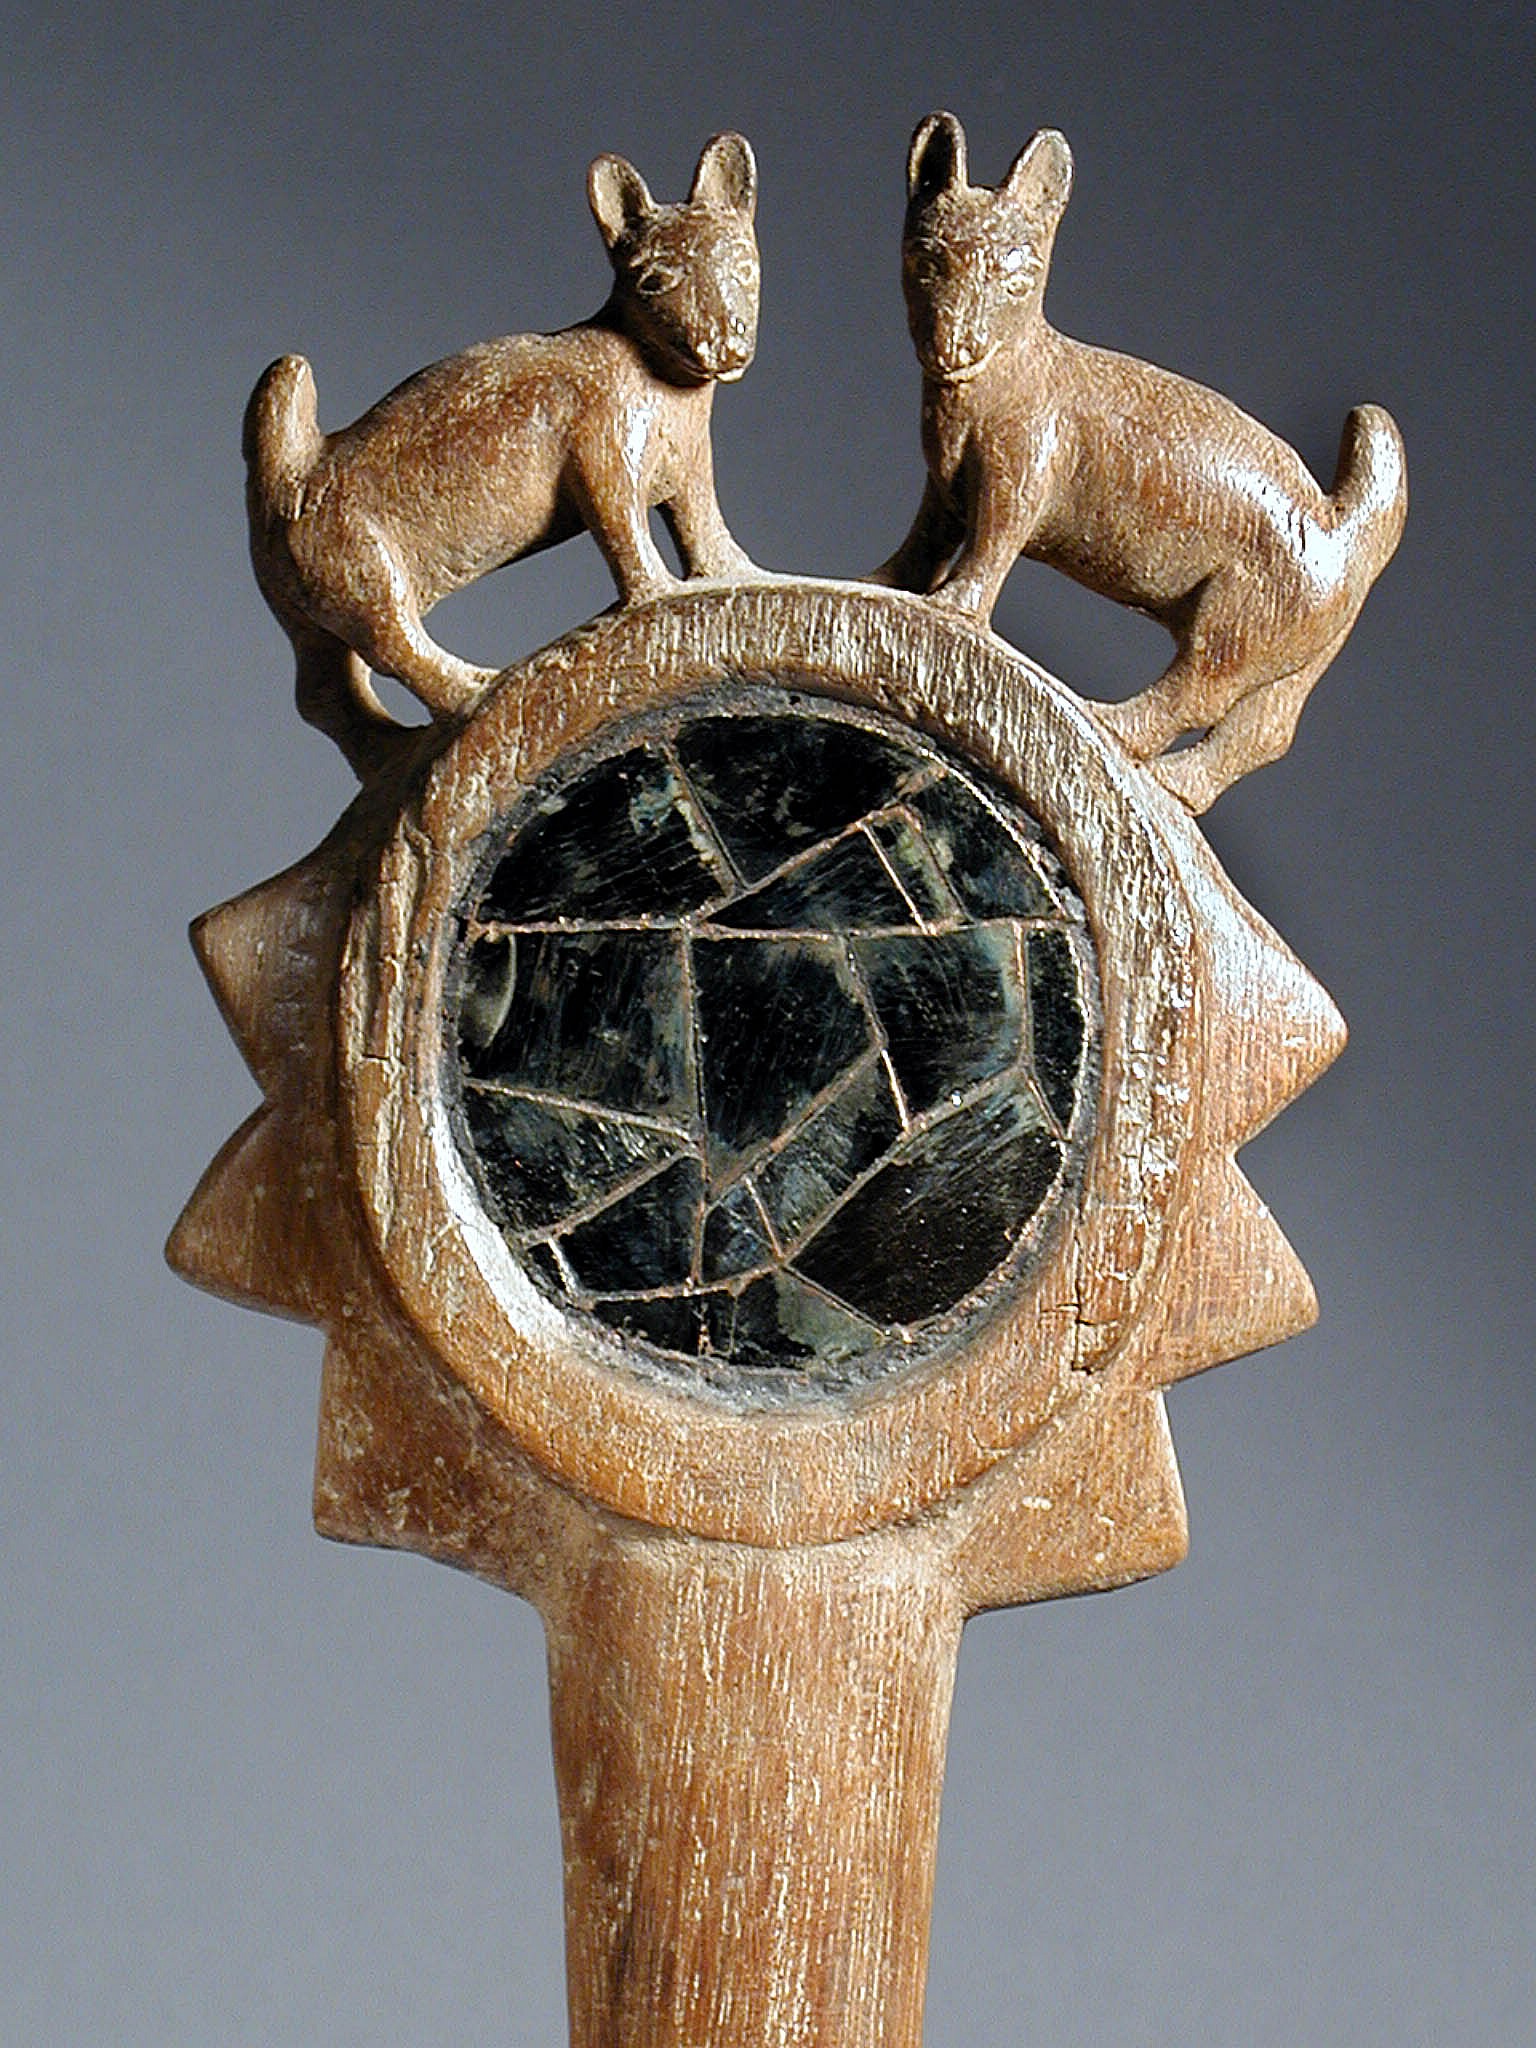 Peru, Wari Long Handle Wood Mirror Back with two deer carved on top
Elegantly carved wood handled mirror decorated with two felines perched on top facing outward.  The mirror frame is carved with a mace-like knobs to give an overall impression of a scepter. The verso side is plain.
Media: Wood
Dimensions: Length 14 1/4"
Price Upon Request
94189